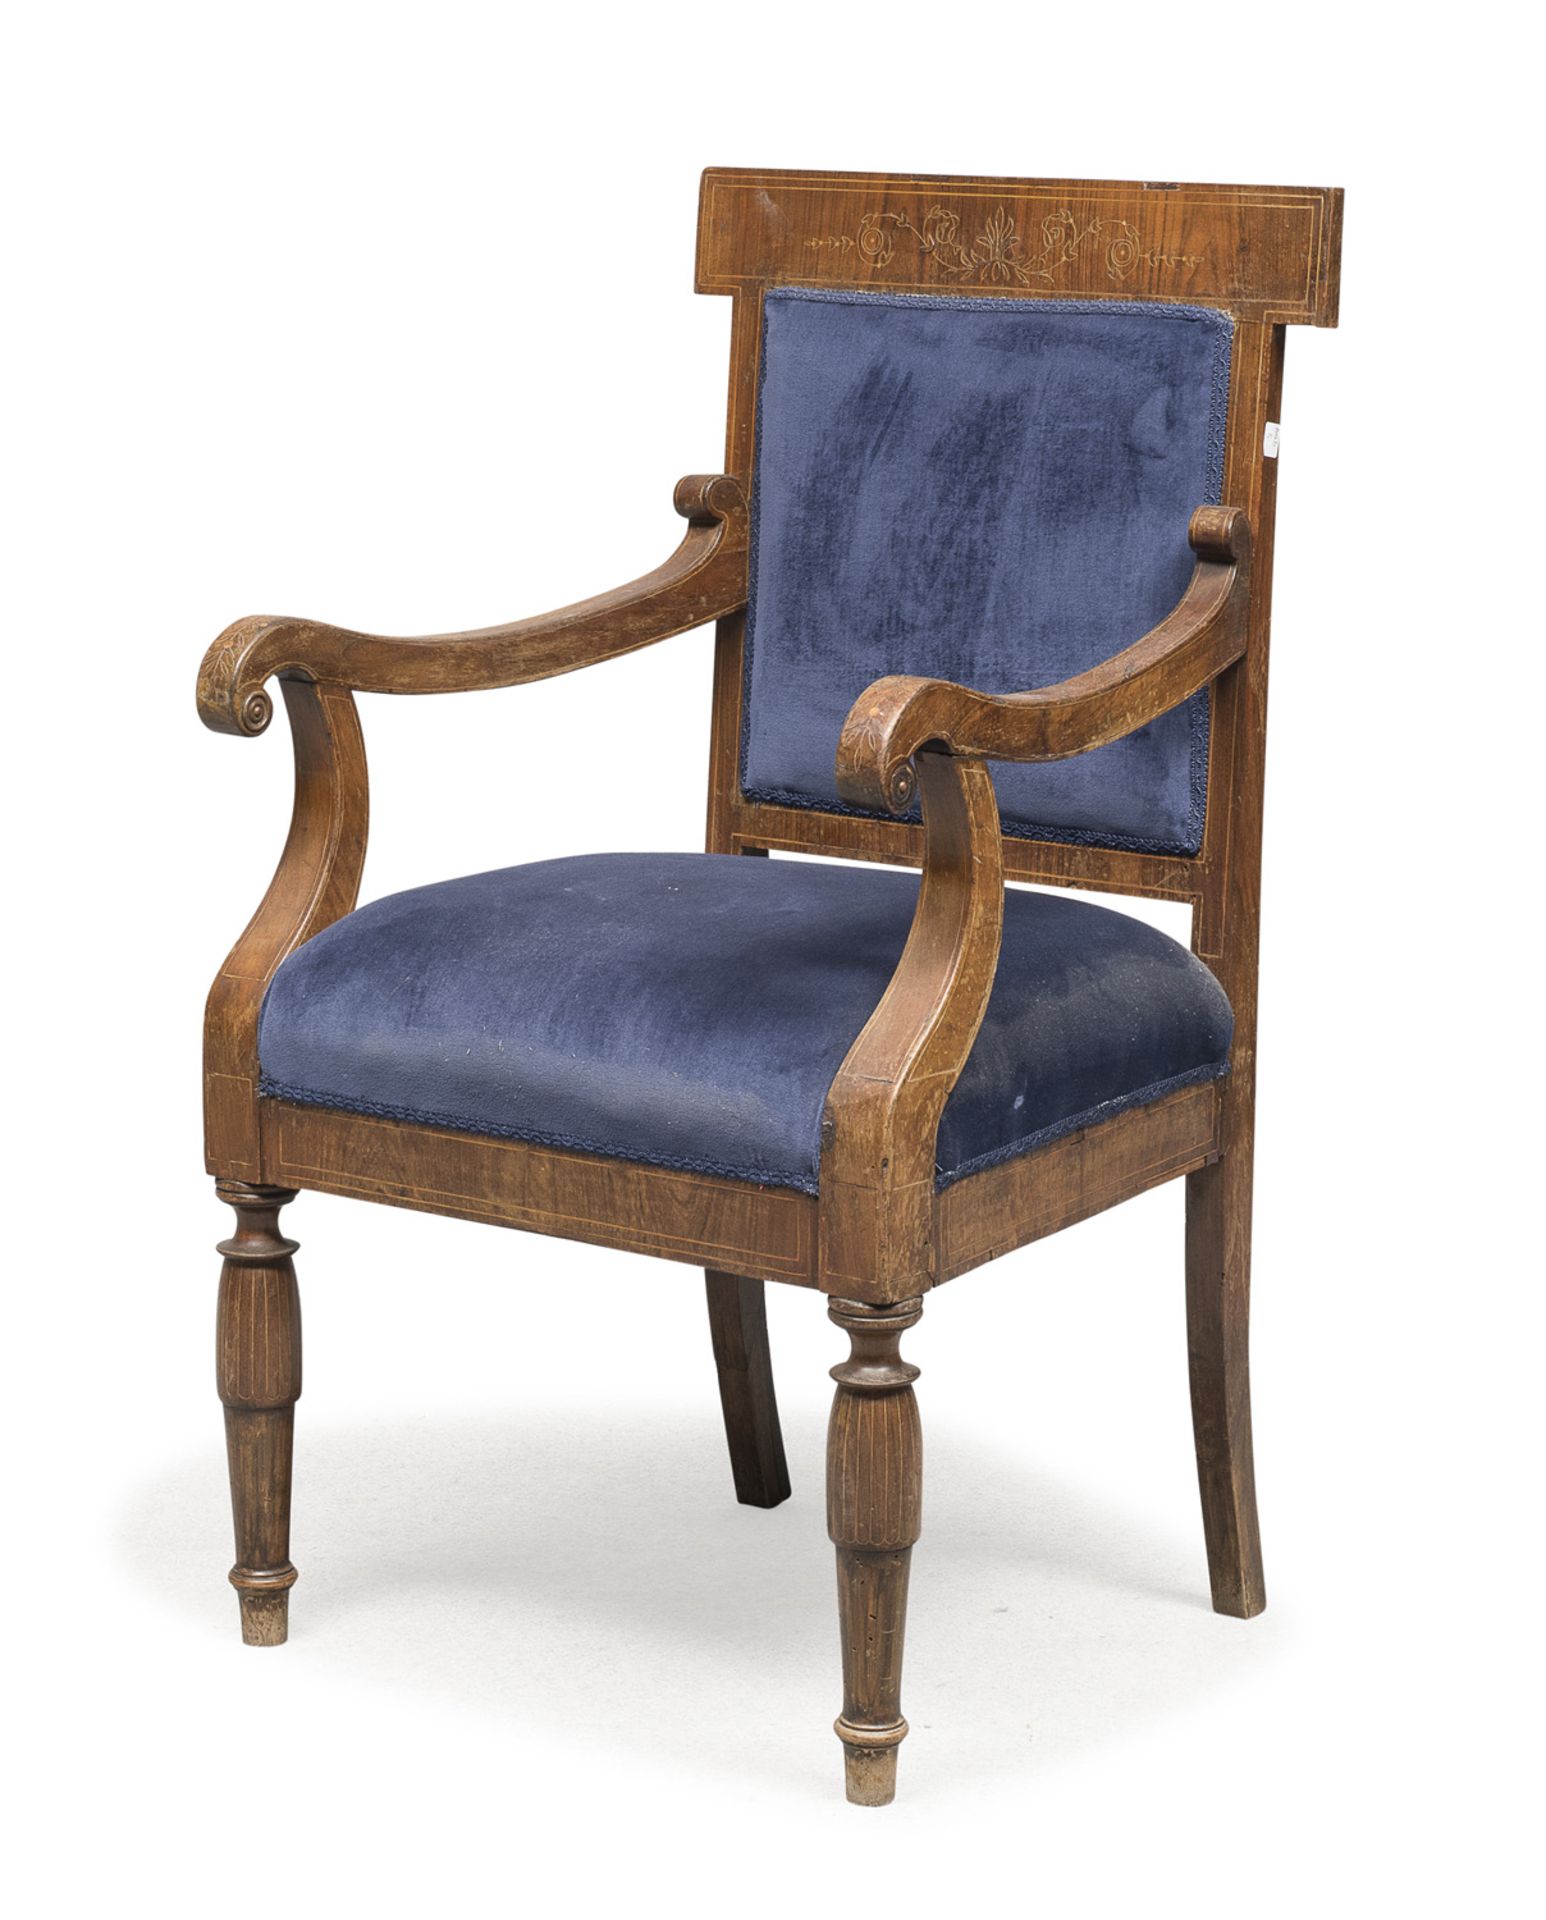 ARMCHAIR IN VIOLET EBONY CONSULATE PERIOD